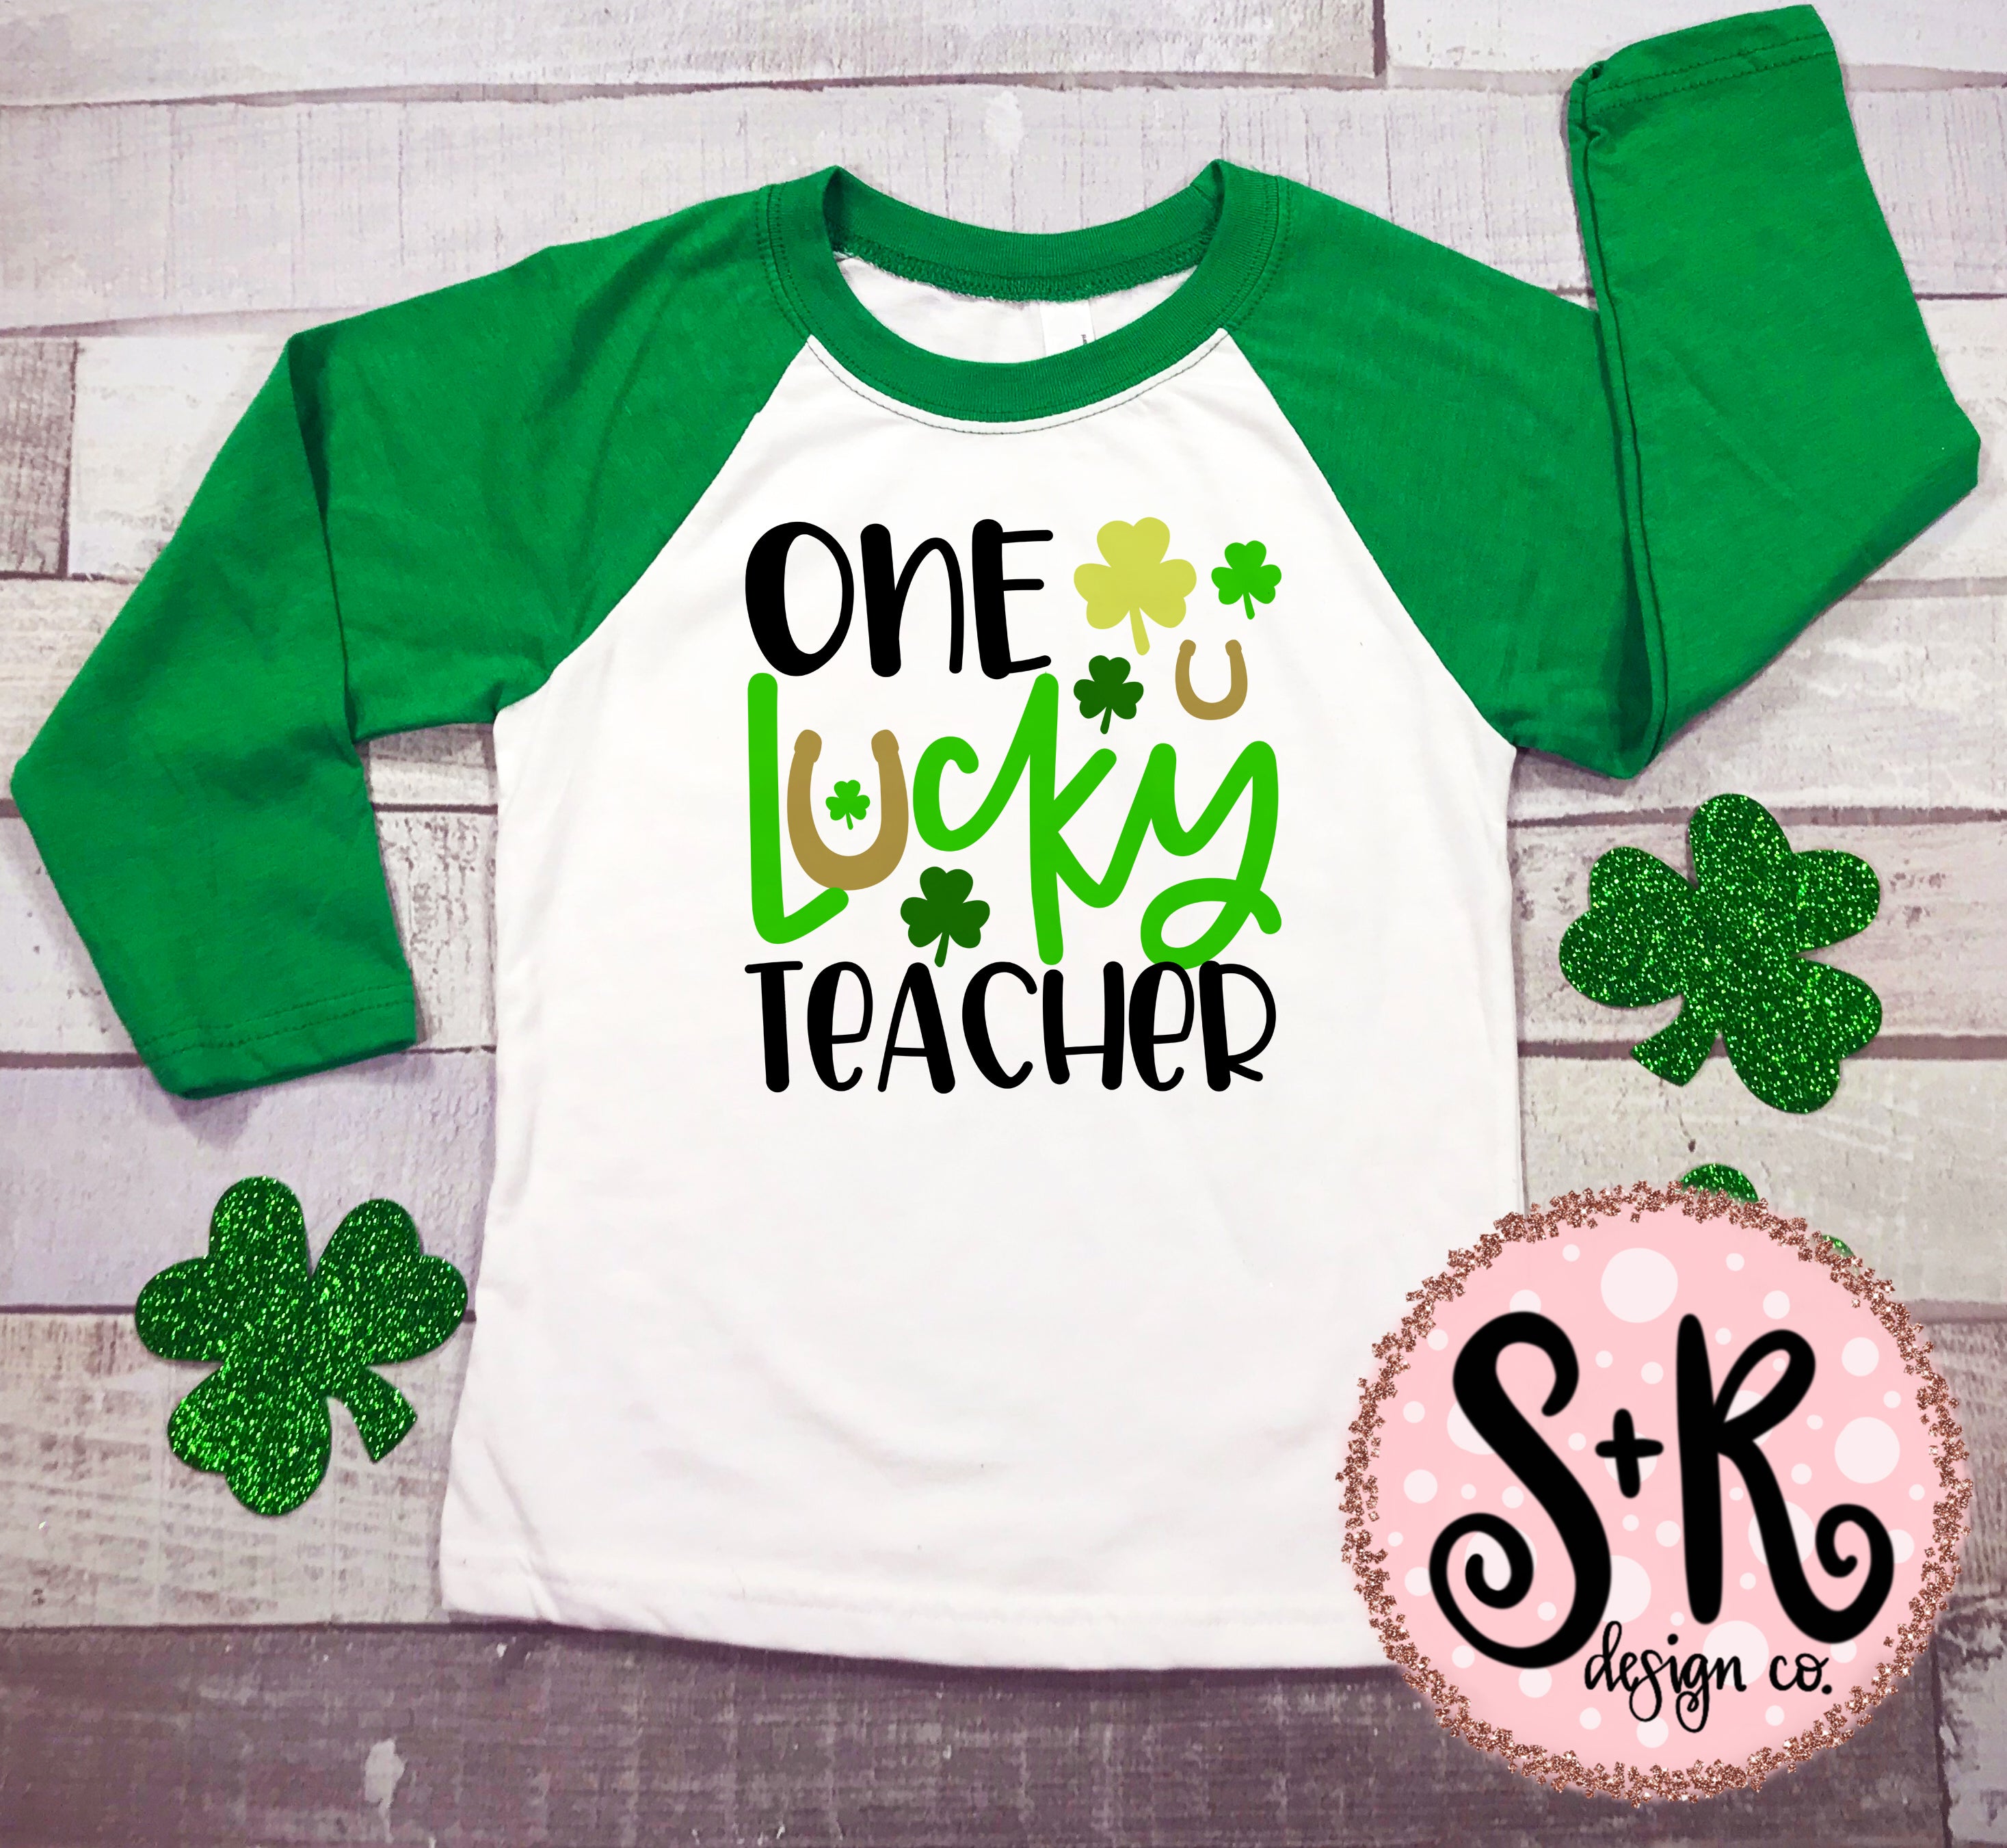 Download One Lucky Teacher Svg Dxf Png Scout And Rose Design Co